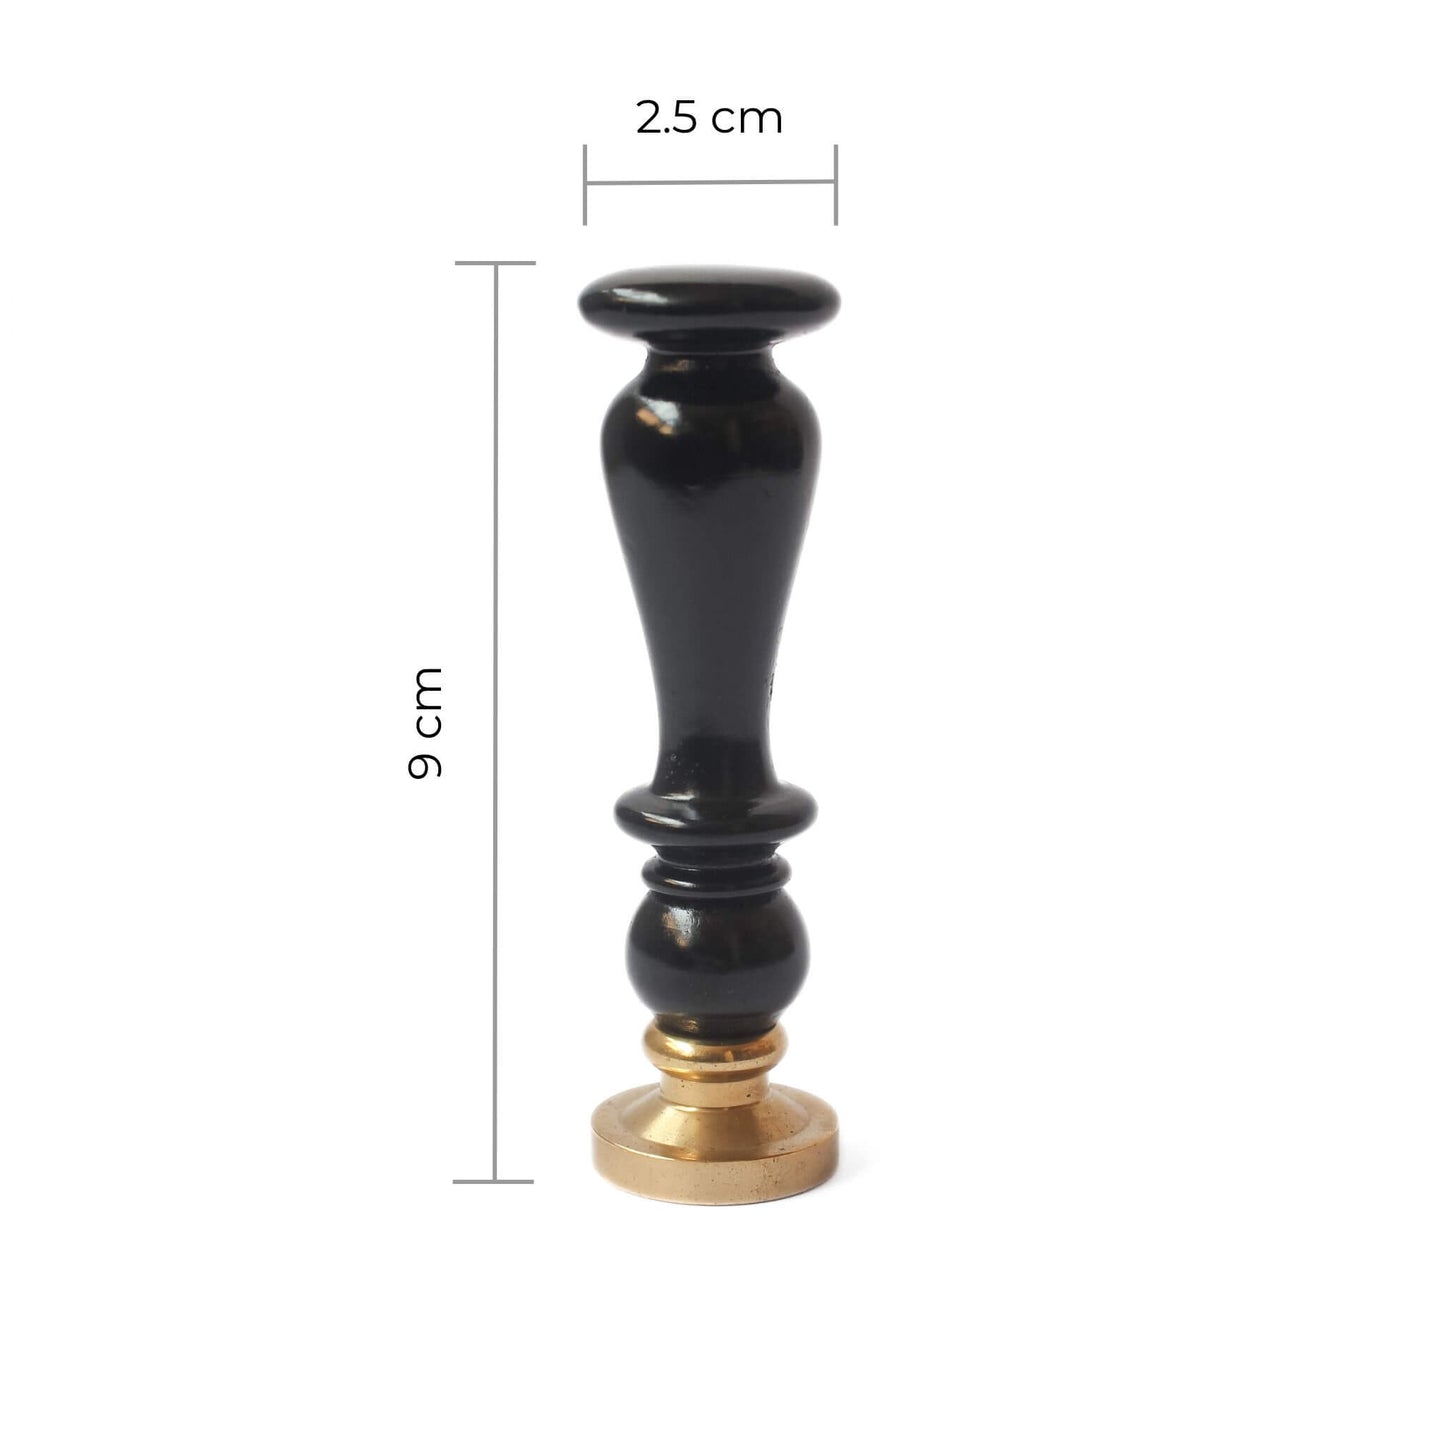 black handled wax seal standing up with measurements